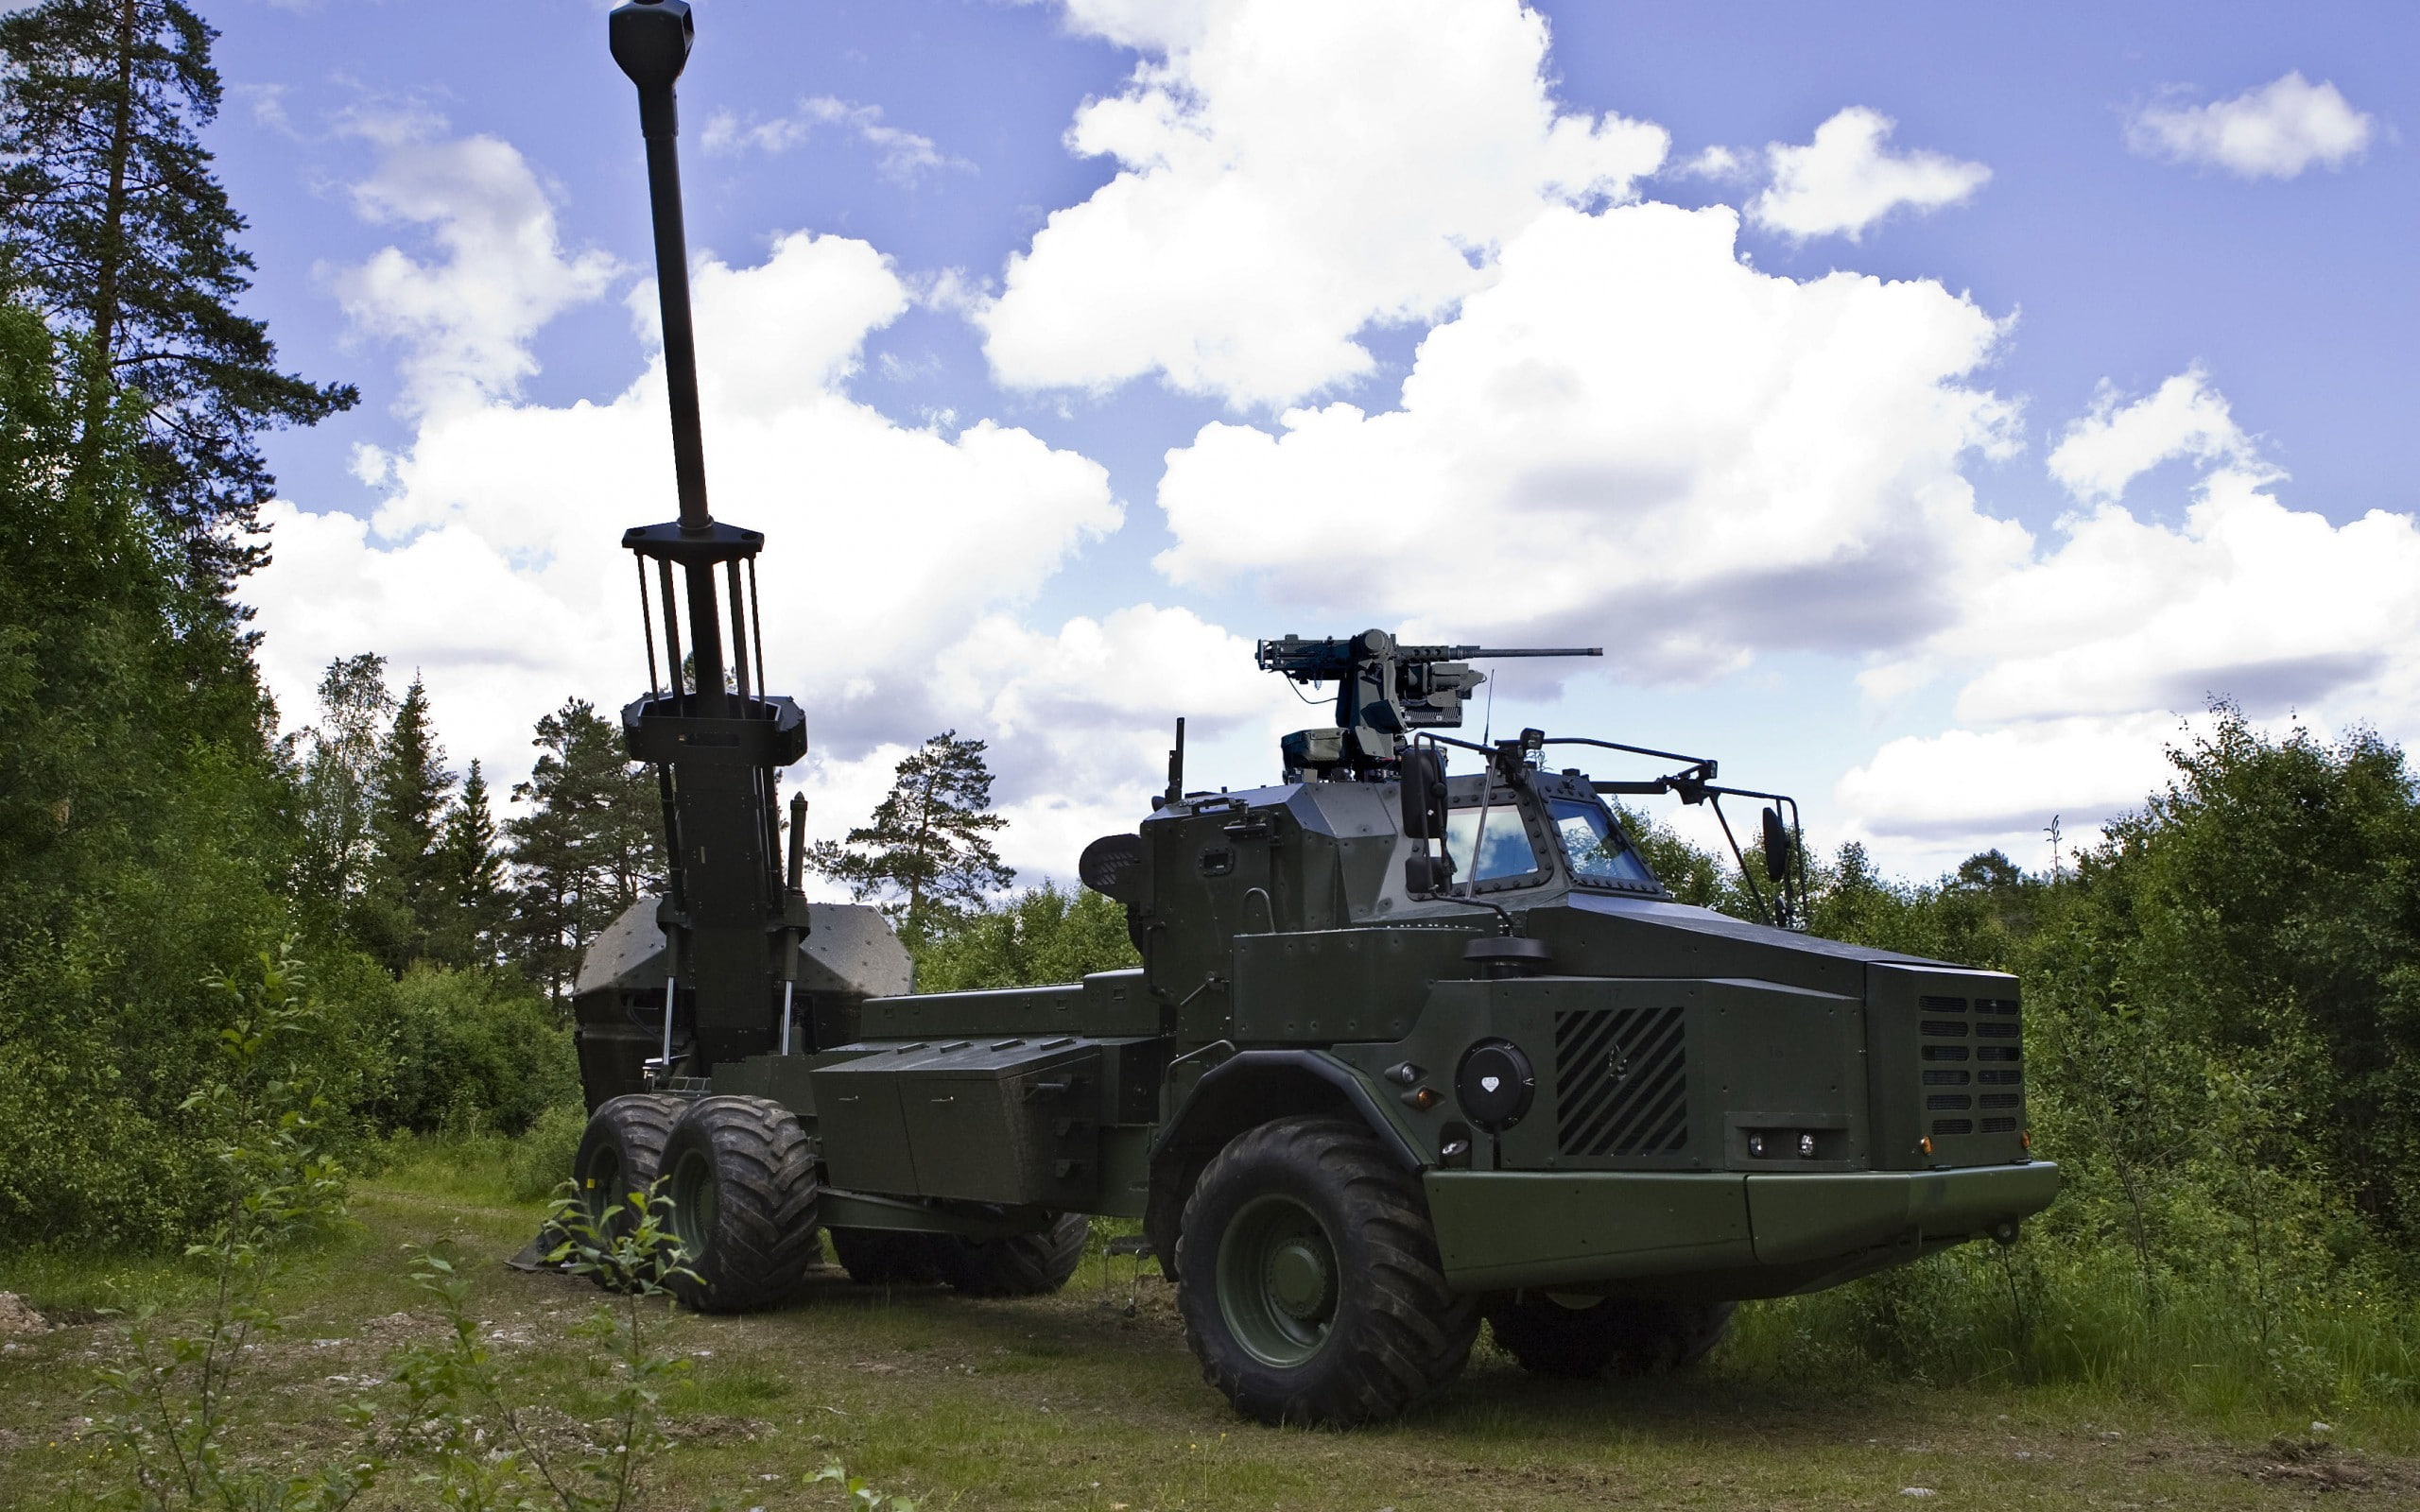 bae systems bofors archer artillery system swedish army self propelled howitzer fh77bw l52